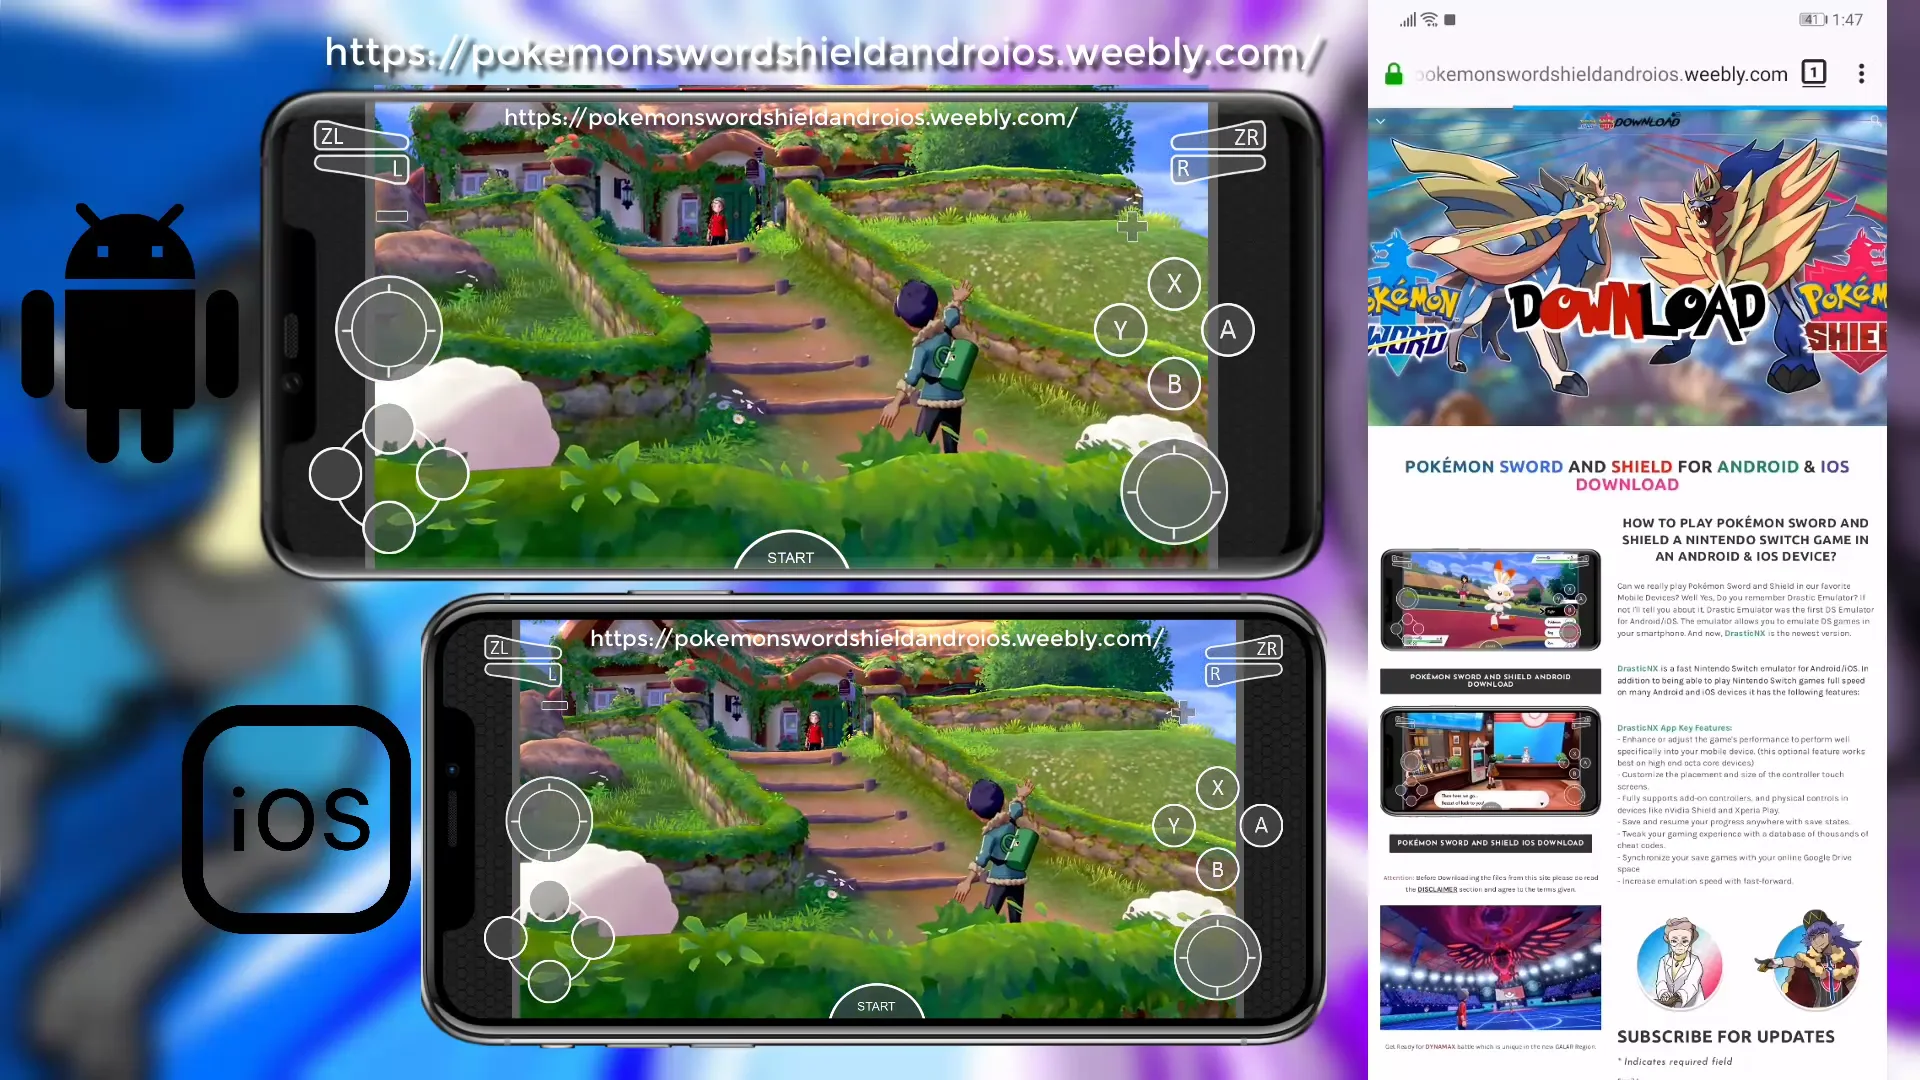 Pokemon Sword and Shield + Crown Tundra Android/iOS Download [Voice  Tutorial] on Vimeo